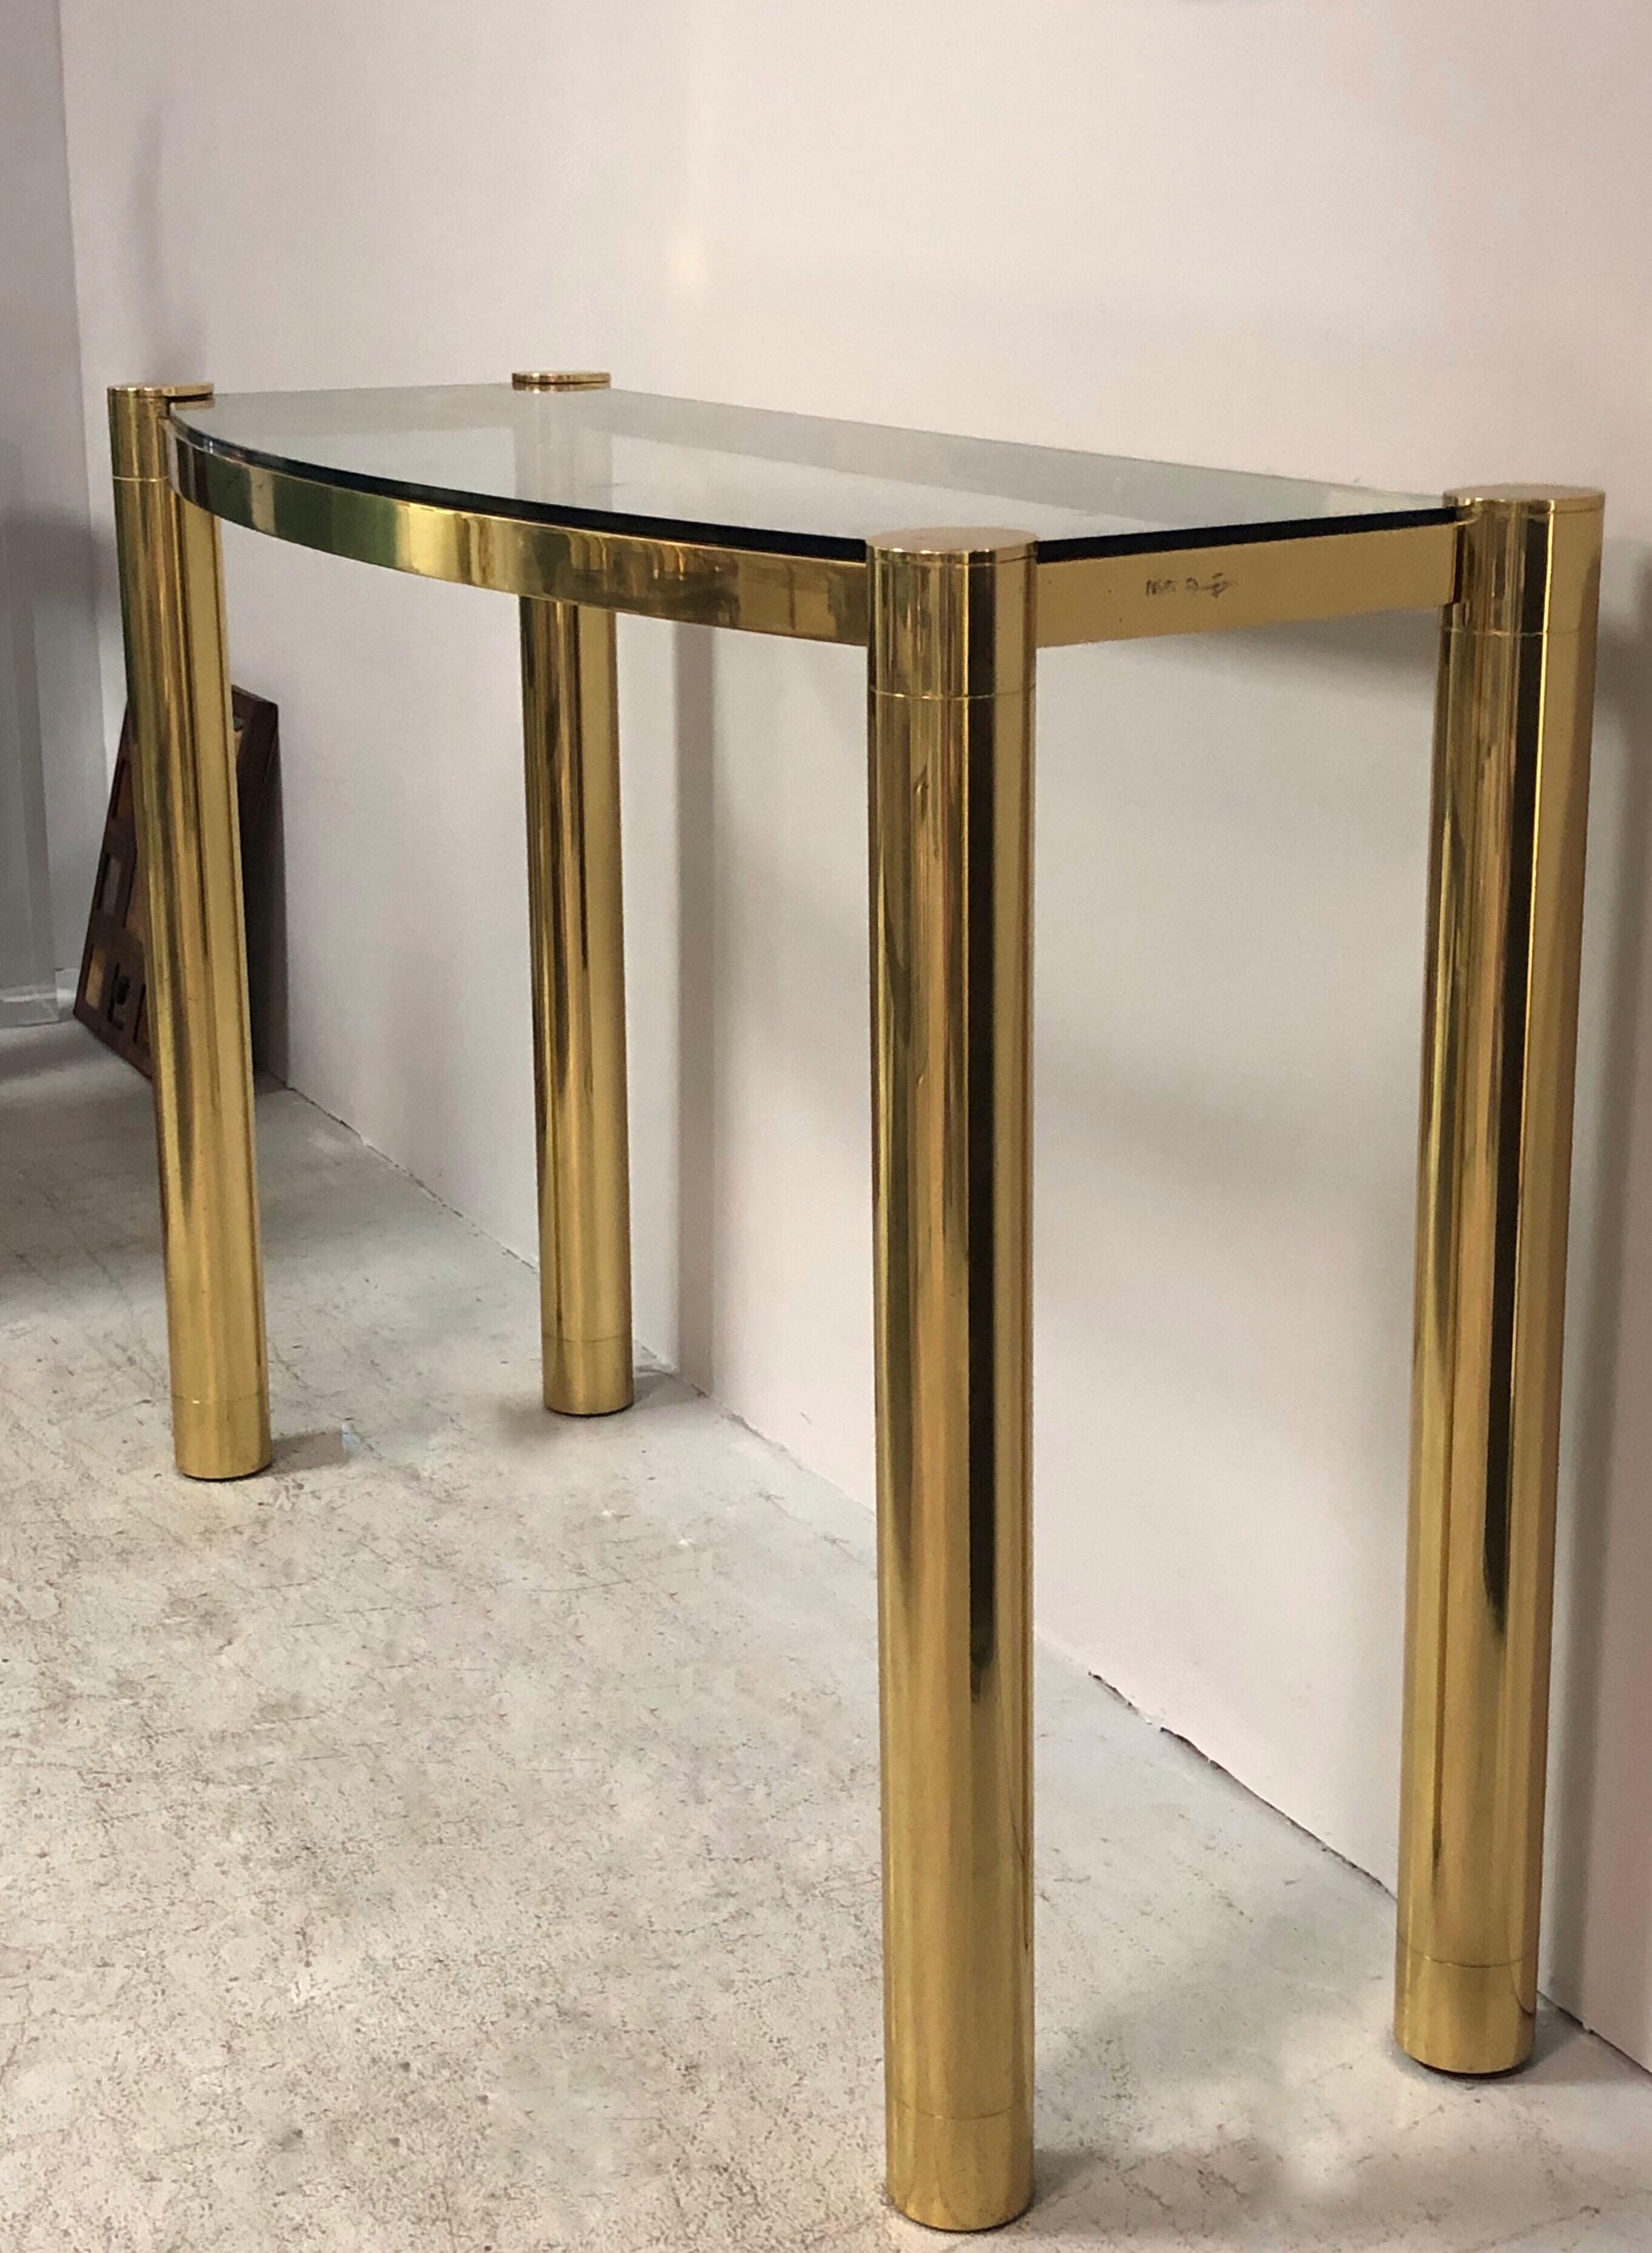 A solid bronze console with glass top by Karl Springer. Exquisitely crafted. Signed on edge. The design is subtle with quite lines that are complemented by the richness of the chosen material.